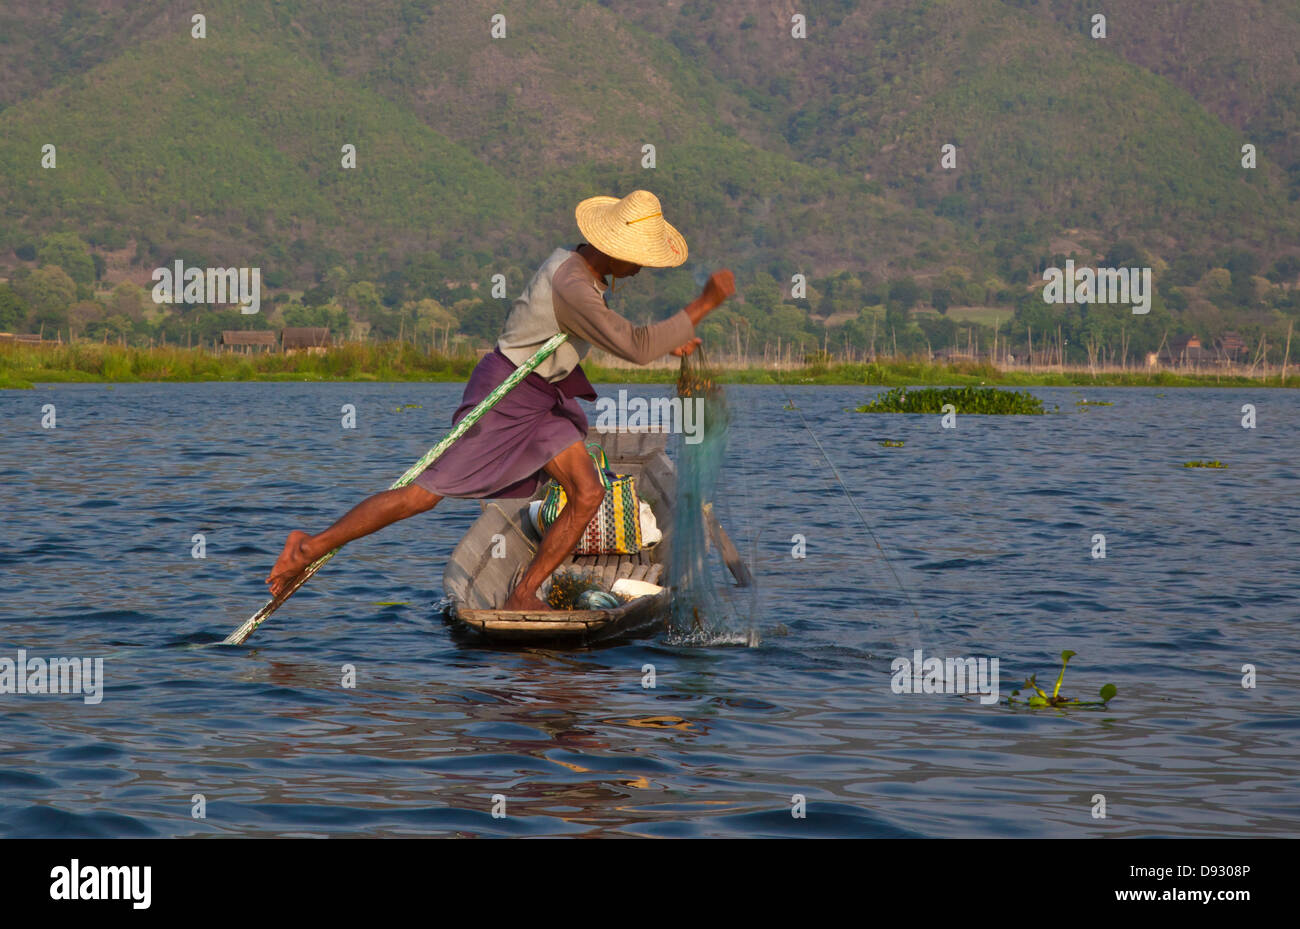 Fishing is still done in the traditonal way with small wooden boats, fishing nets and leg rowing - INLE LAKE, MYANMAR Stock Photo